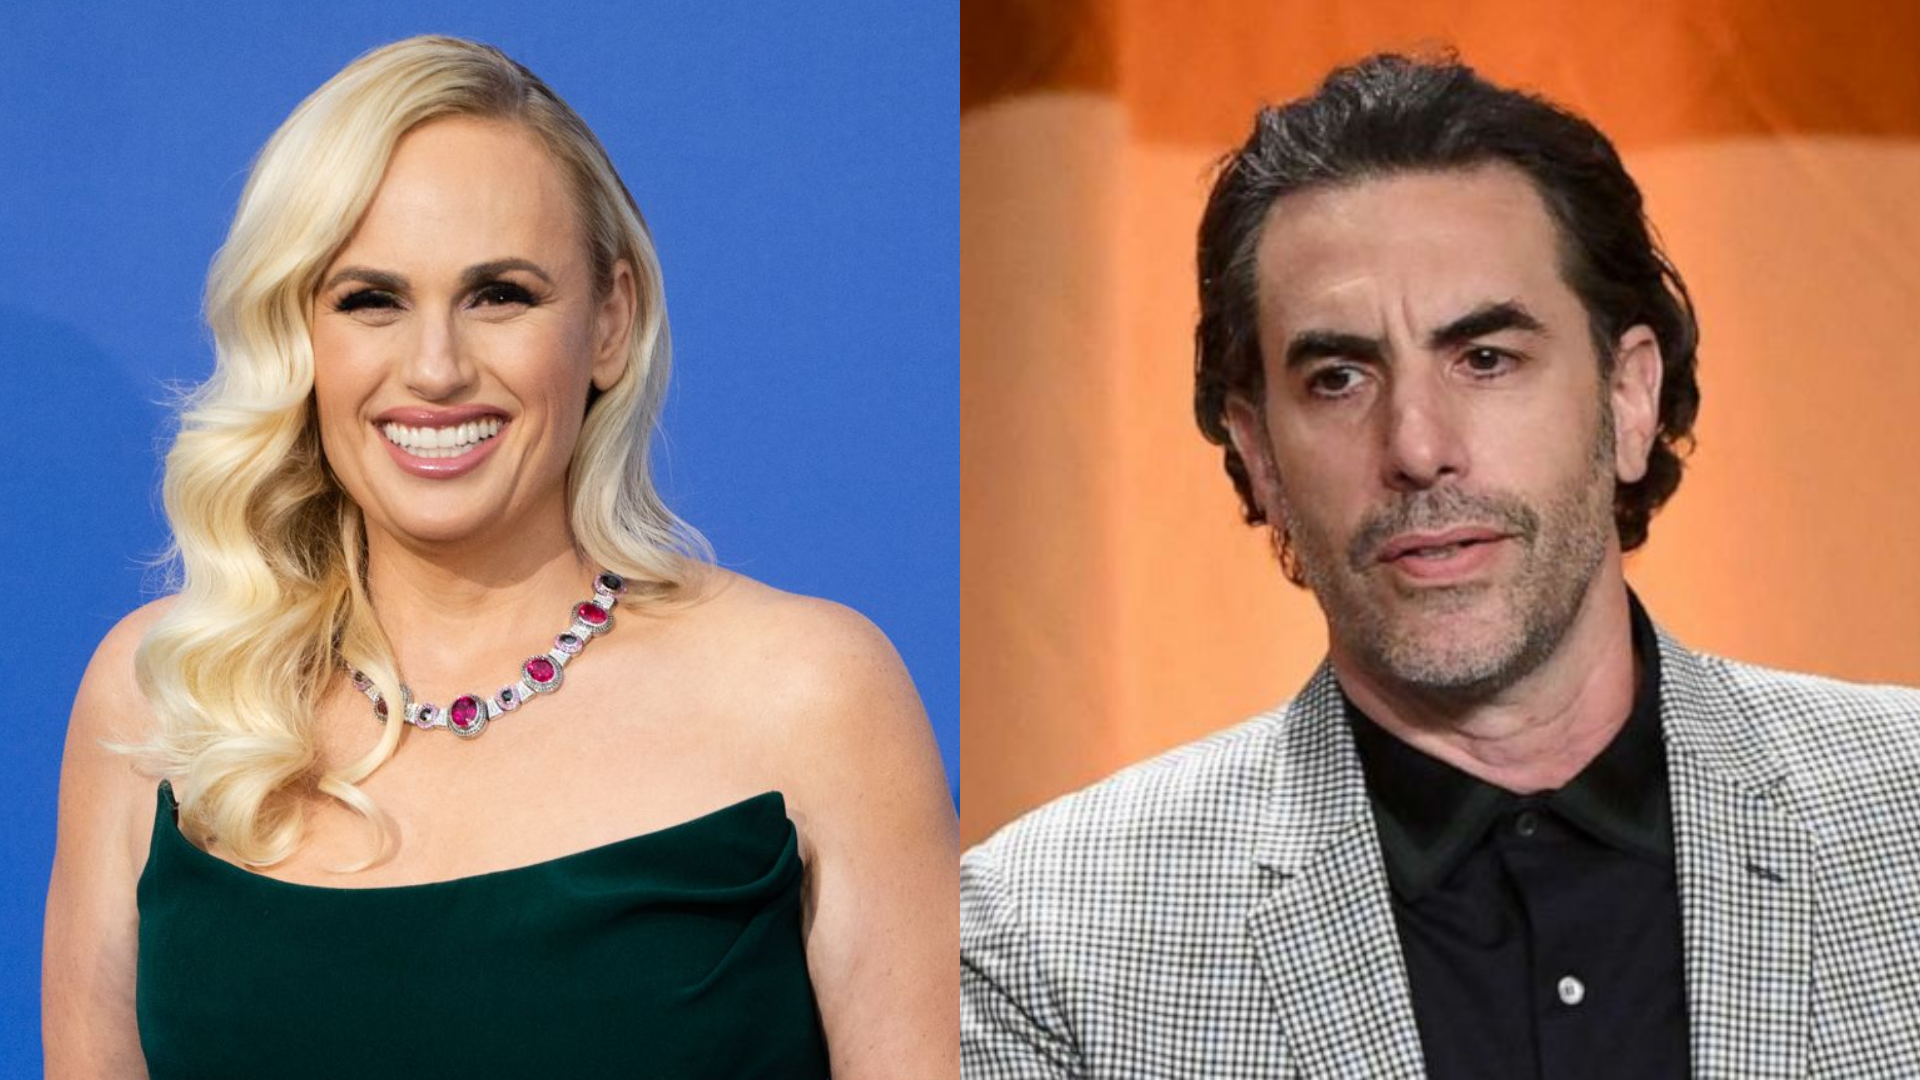 Rebel Wilson Dubs Sacha Baron Cohen As “Massive A**HOLE” After Revealing He Threatened Her Over Memoir